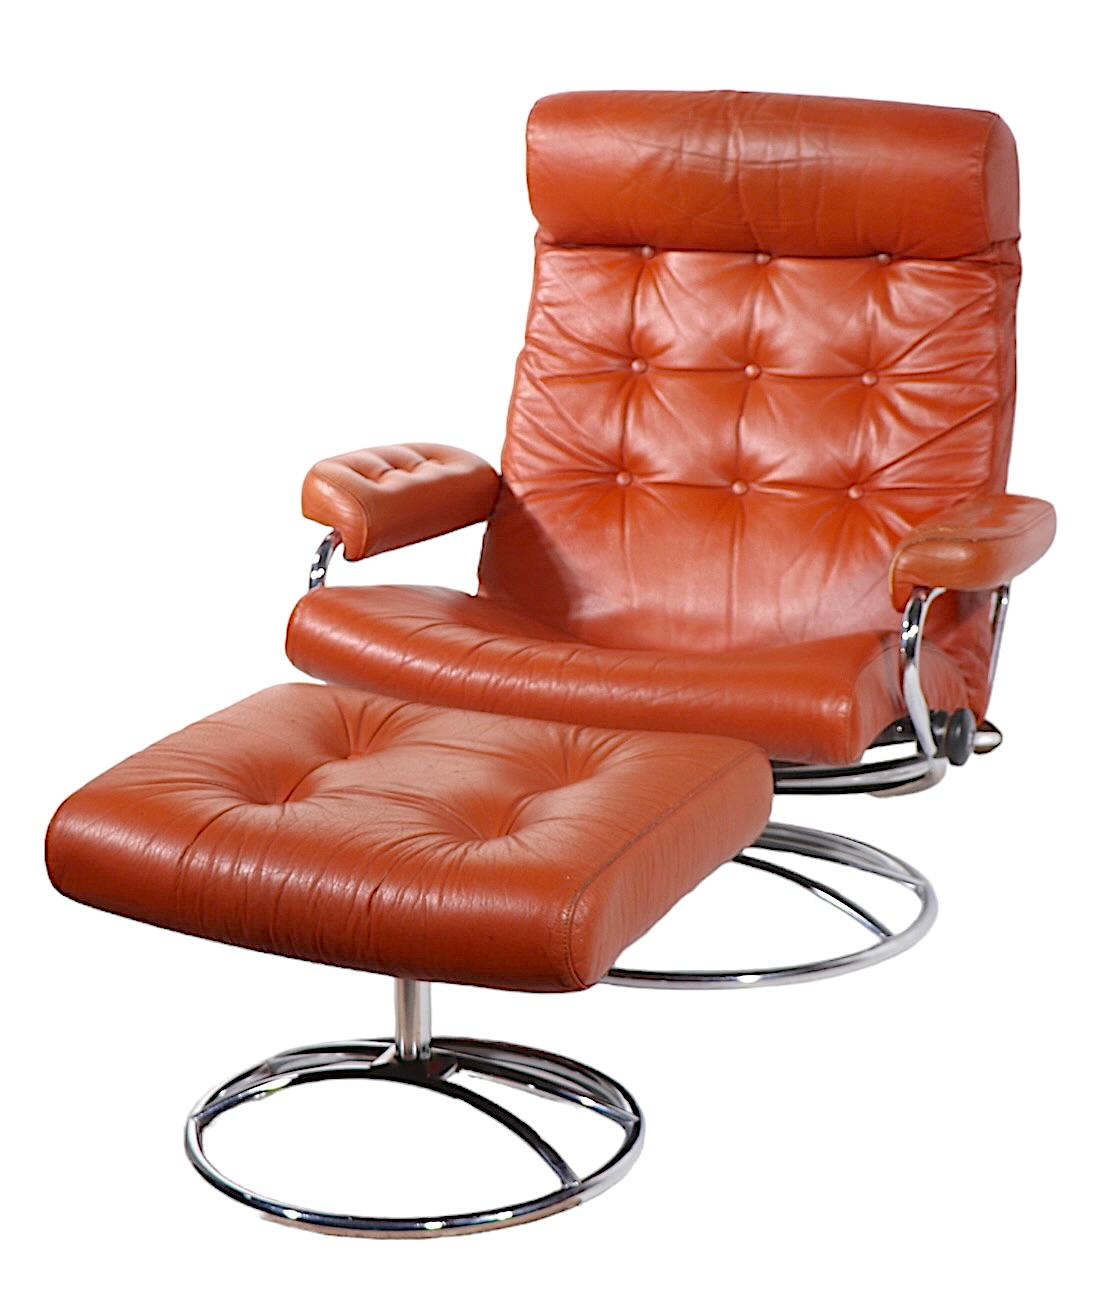 Vintage Mid Century  Brown Leather and Chrome Reclining Chair by Ekornes 4